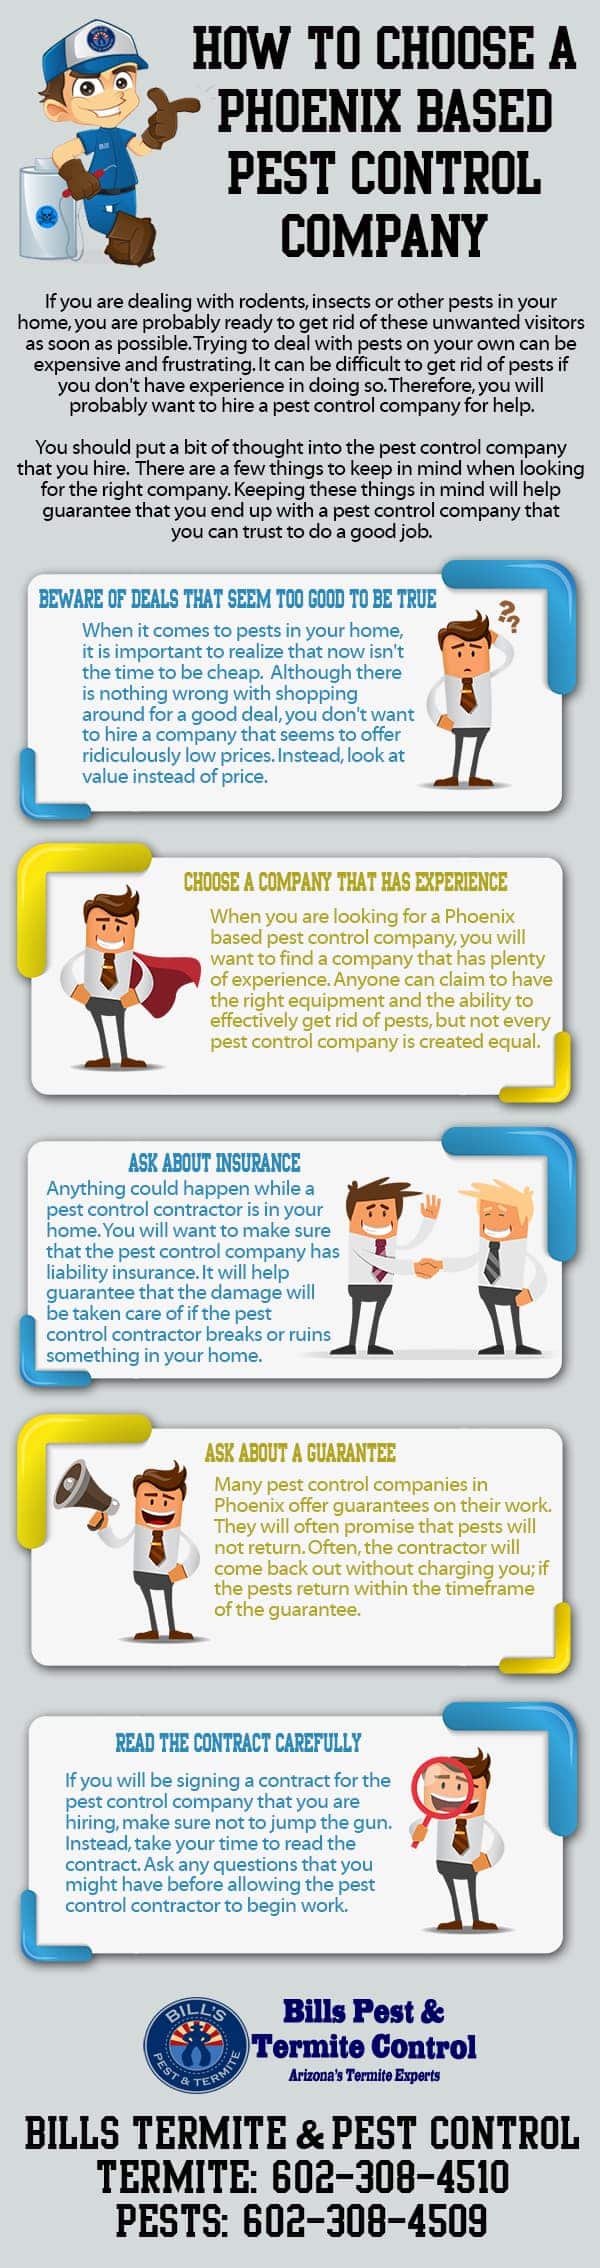 infographic-151-how-to-choose-a-phoenix-based-pest-control-company